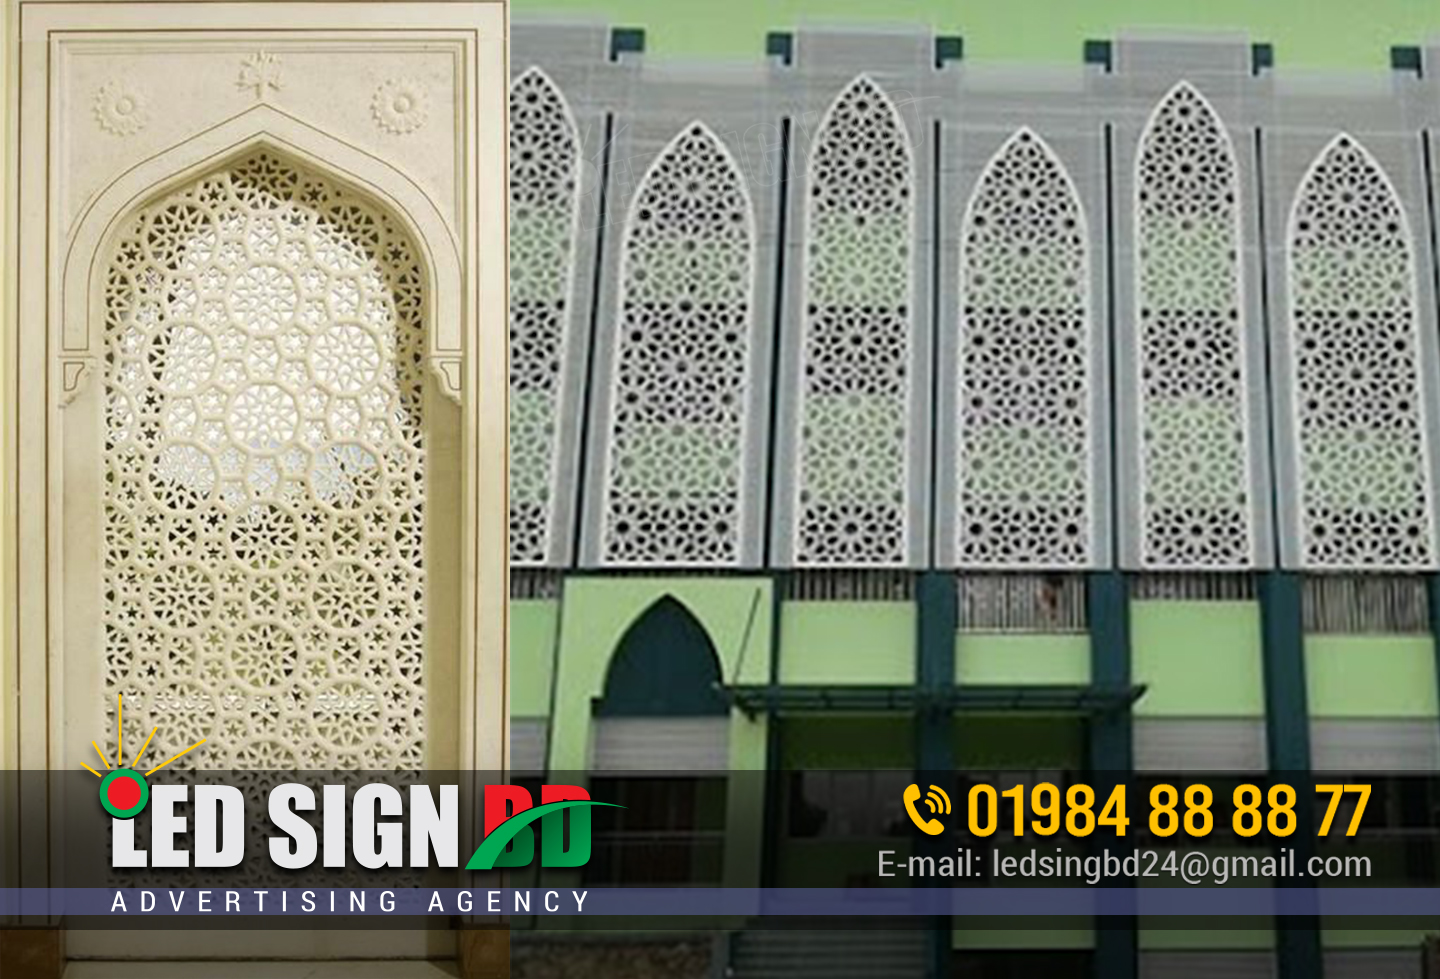 “Led Sign BD Ltd” is the CNC Jali Cutting Design Company in Dhaka Bangladesh. We are working in this sector (CNC Jali Cutting Design) since 2006 inside Dhaka and outside Dhaka. We complete 2500+ CNC Jali Cutting Design Projects last 10 years. For our good service with lifetime support our customer is very happy. We are working with all kind of CNC Jali Cutting Design outside decoration by acrylic letter signage. CNC Jali Cutting Design in Bangladesh. #ramadan #gift #corporate #ramadangift #ramadankareem#Inspiration #hotel, #residential #commercial #design #inspiration #architecture #planning #developers #architects #buildings #property #house #interiorarchitecture #modernarchitecture #newbuilds #buildingdesign #interiordesigners #architecture #architects #designers #linkedin #business #interiordesign #interior #designer #architect #architecturaldesign #cncjalicuttingbangladesh #fiberLaser #lasercutting #lasercut #metallasercutting #MetalPartition #metalfabrication #windowgrill #belconygrill #metalcutting #mosquedesign ##cncwoodworking #lasercutting #fiberlaser #metalcutting #metalfabrication #metalgate #metalrailing #metalwindows #laserwoodcutting #interiordecor #interiordesign #exteriordesign #mosquedoor #mosquedesign CNC jali cutting, wall panel, designed wood door, are the most essential elements in the field of modern architecture, interior and exterior design. At present most of these are executed by the CNC machine. The journey of the “led sign bd ltd” started on 1st January 2006. We are one of the top CNC designs provider in Bangladesh. We are skilled in the field of CNC jali cutting, 2D and 3D panel, designed wood door and all kind of interior design. Kathuriya cutting and engraving design on wood, MDF board, Plywood board, veneer board, particle board, laminate board, acrylic board, PVC board, ACP board, solid wood, composite panel. We are much expertise in the field of customized design. Please share your requirement’s image or imagination with us. Our design team will fulfill your requirement ASAP. Metal cutting on 2mm and 3mm MS and SS metal plain sheet.